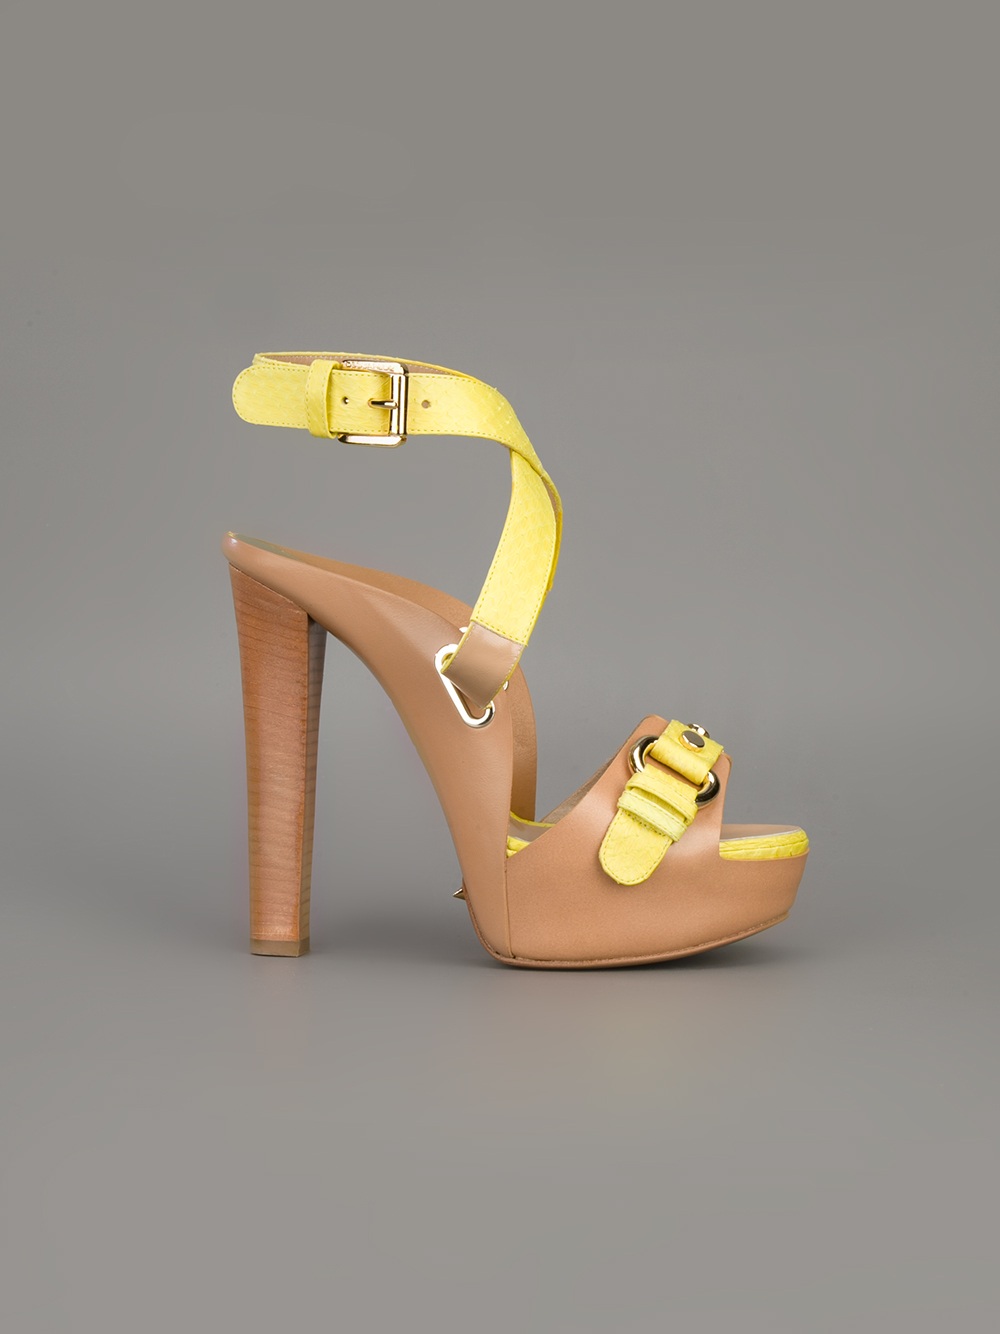 Lyst - Dsquared² Platform Sandal in Yellow